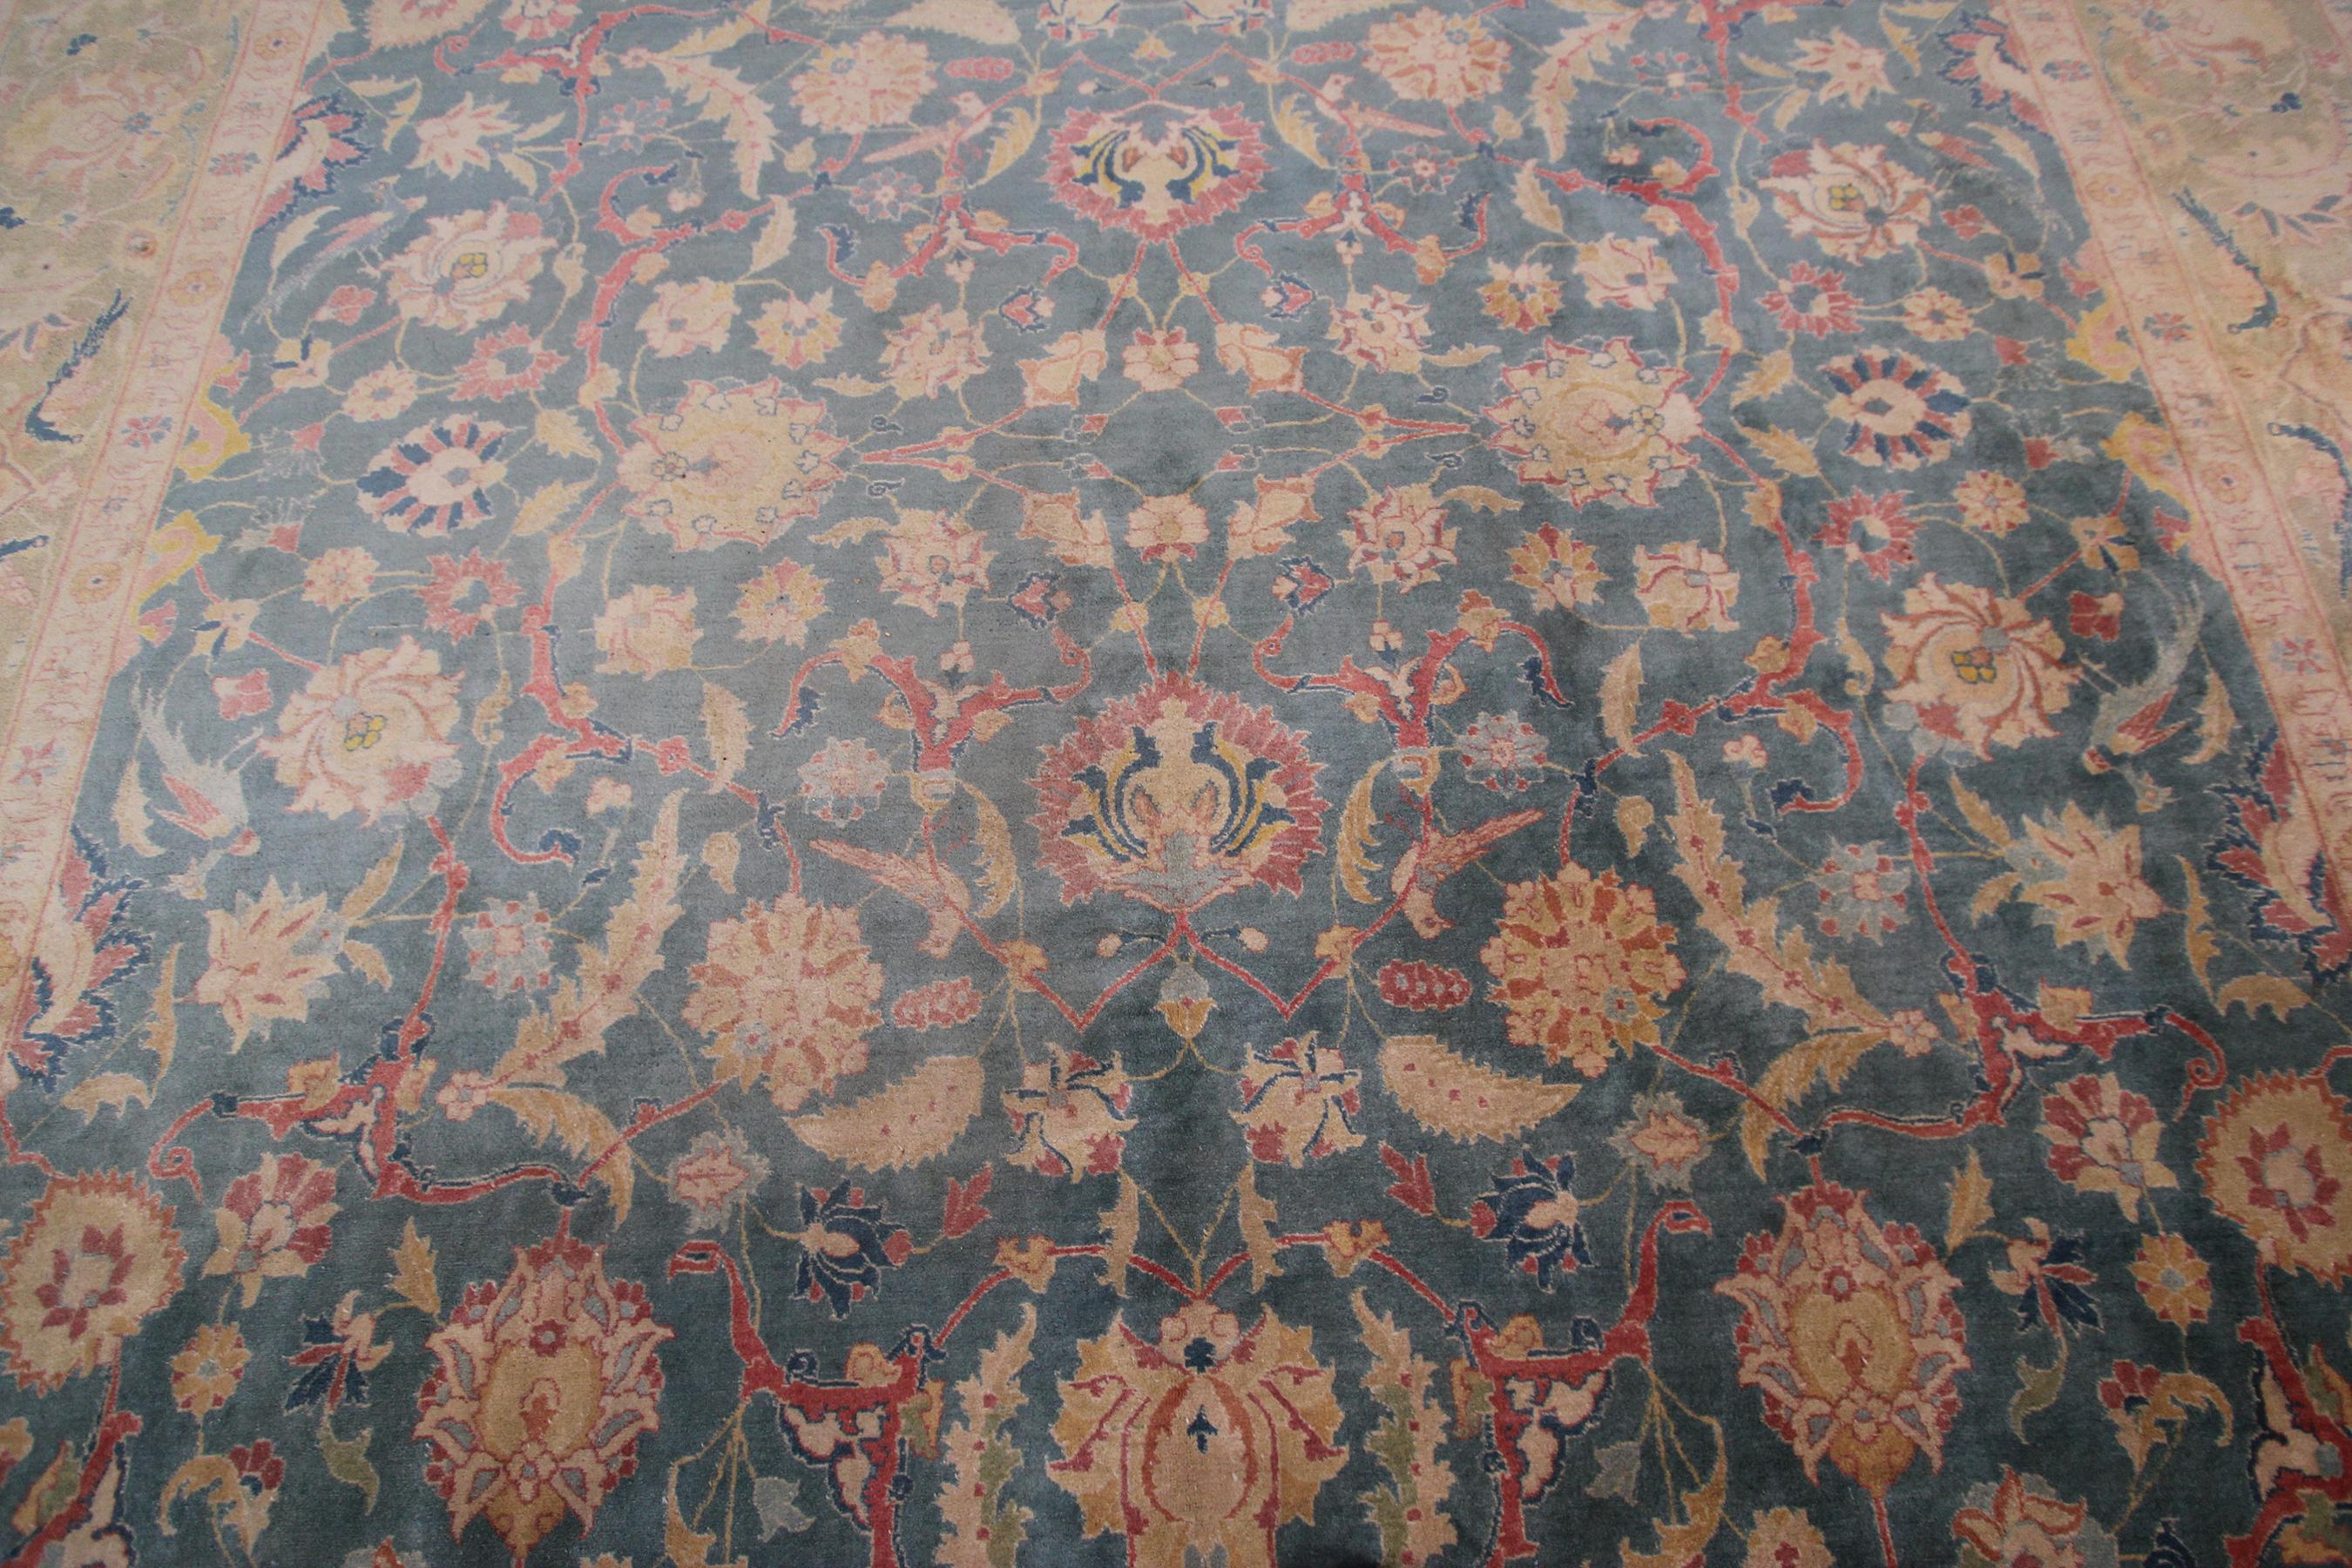 Hand-Knotted Antique Persian Rug Antique Persian Tabriz Rug Geometric Overall Allover For Sale